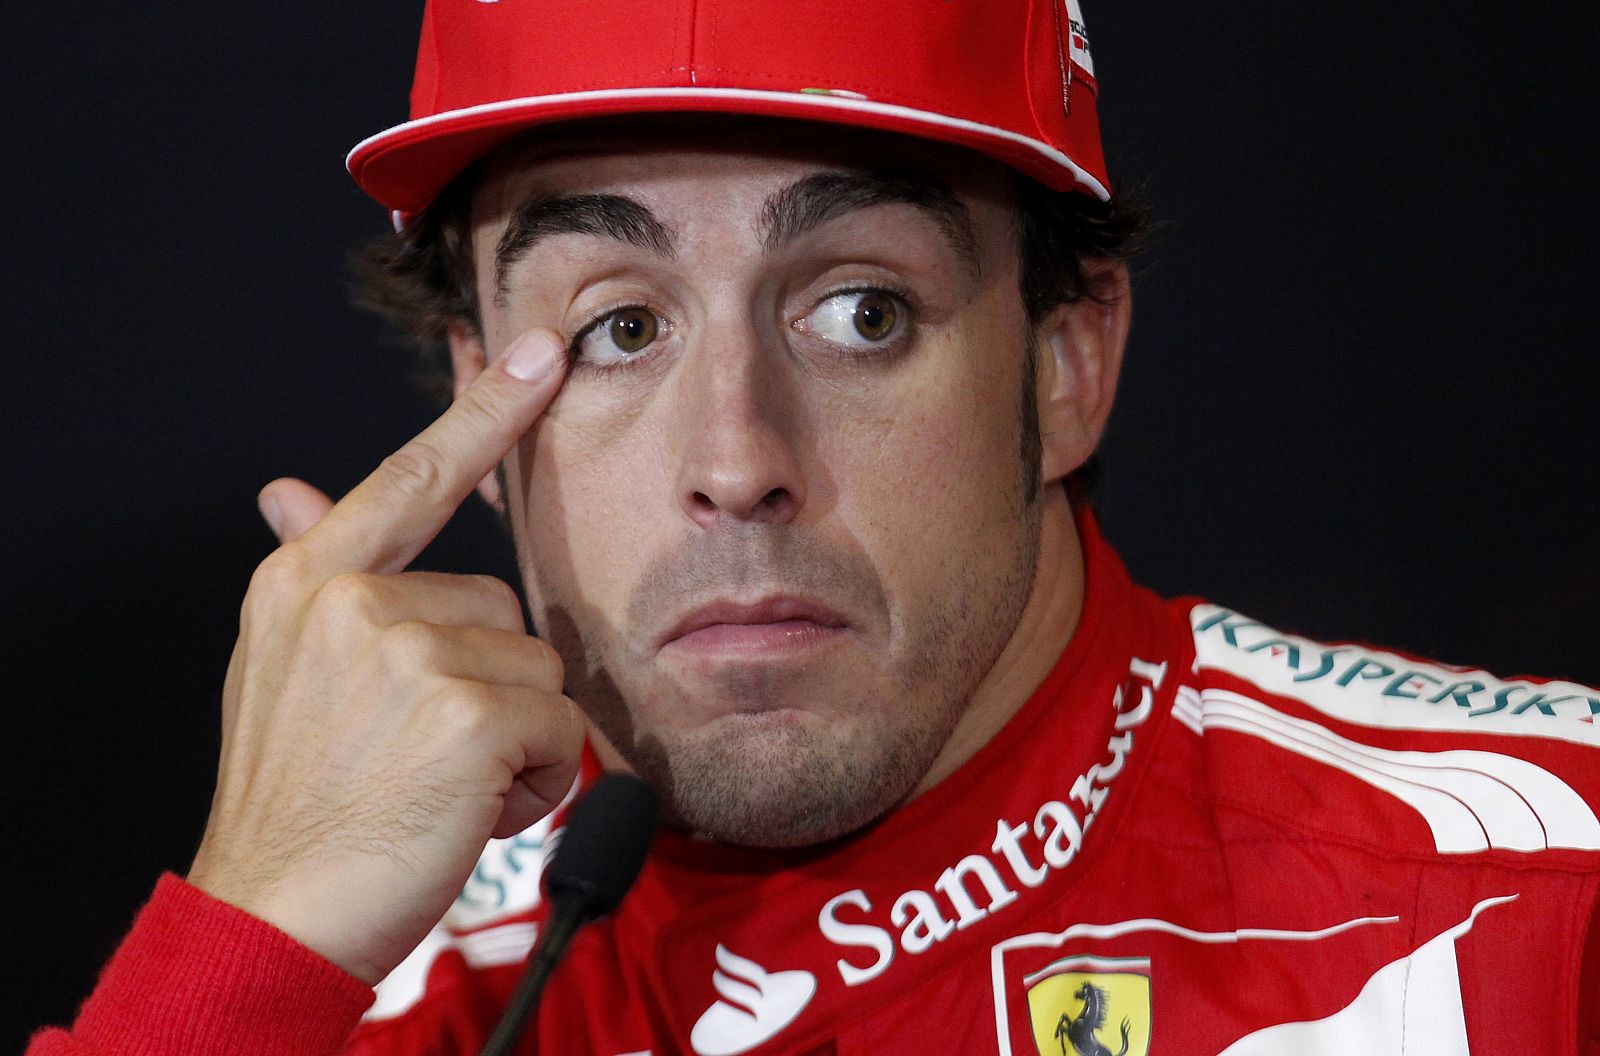 Ferrari Formula One driver Fernando Alonso of Spain attends a news conference after taking second place in the British F1 Grand Prix at Silverstone